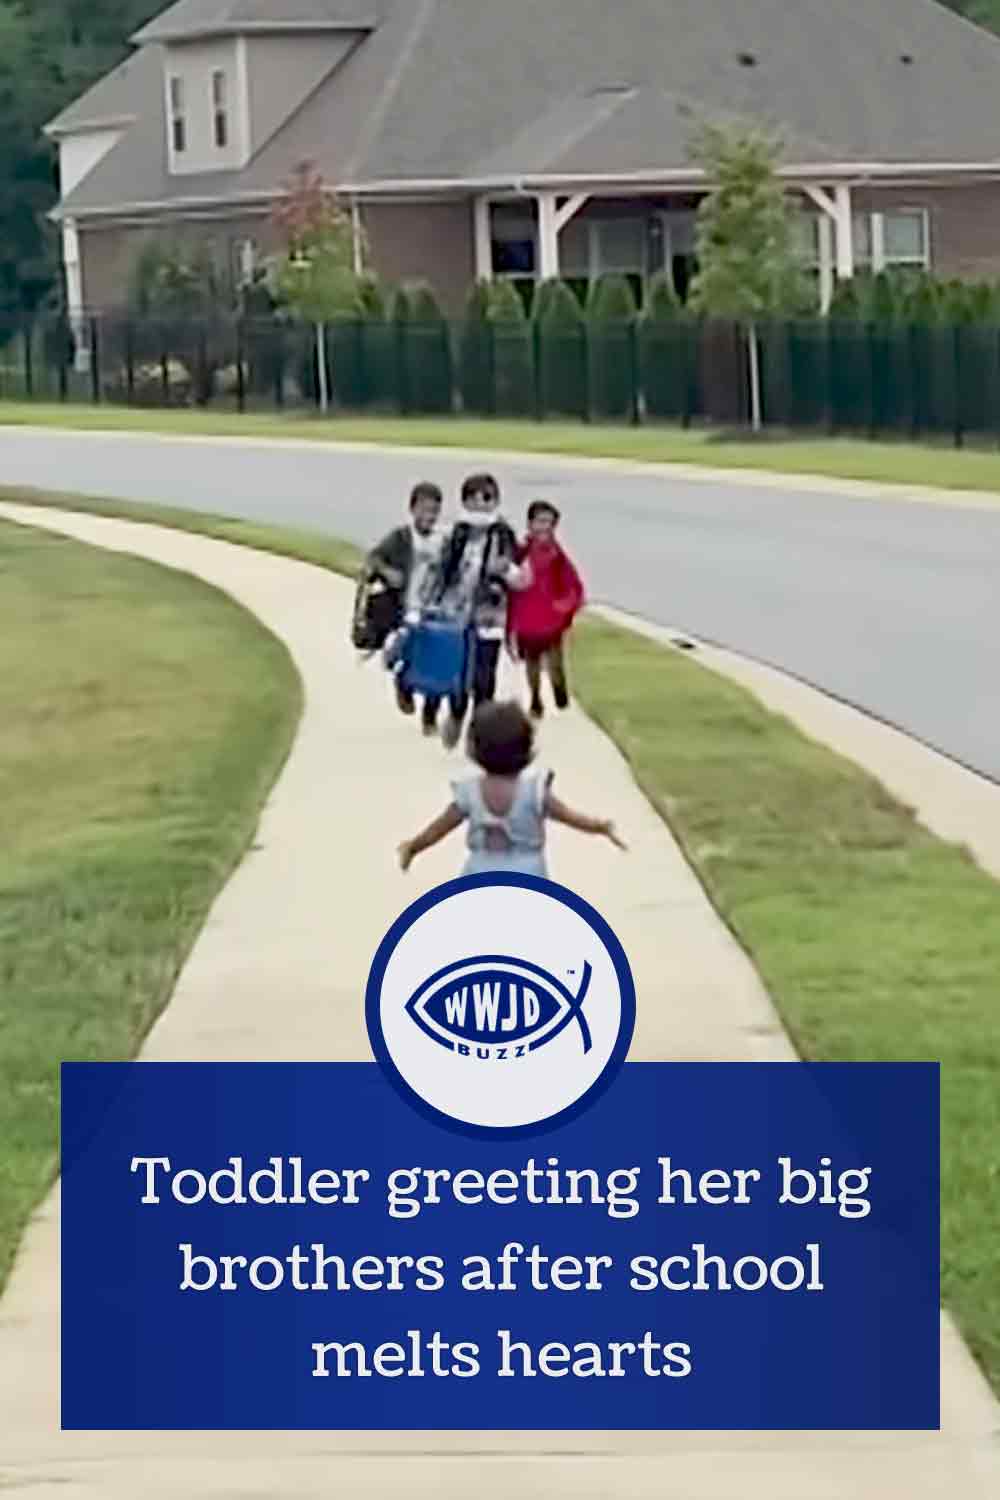 Toddler greeting her big brothers after school melts hearts